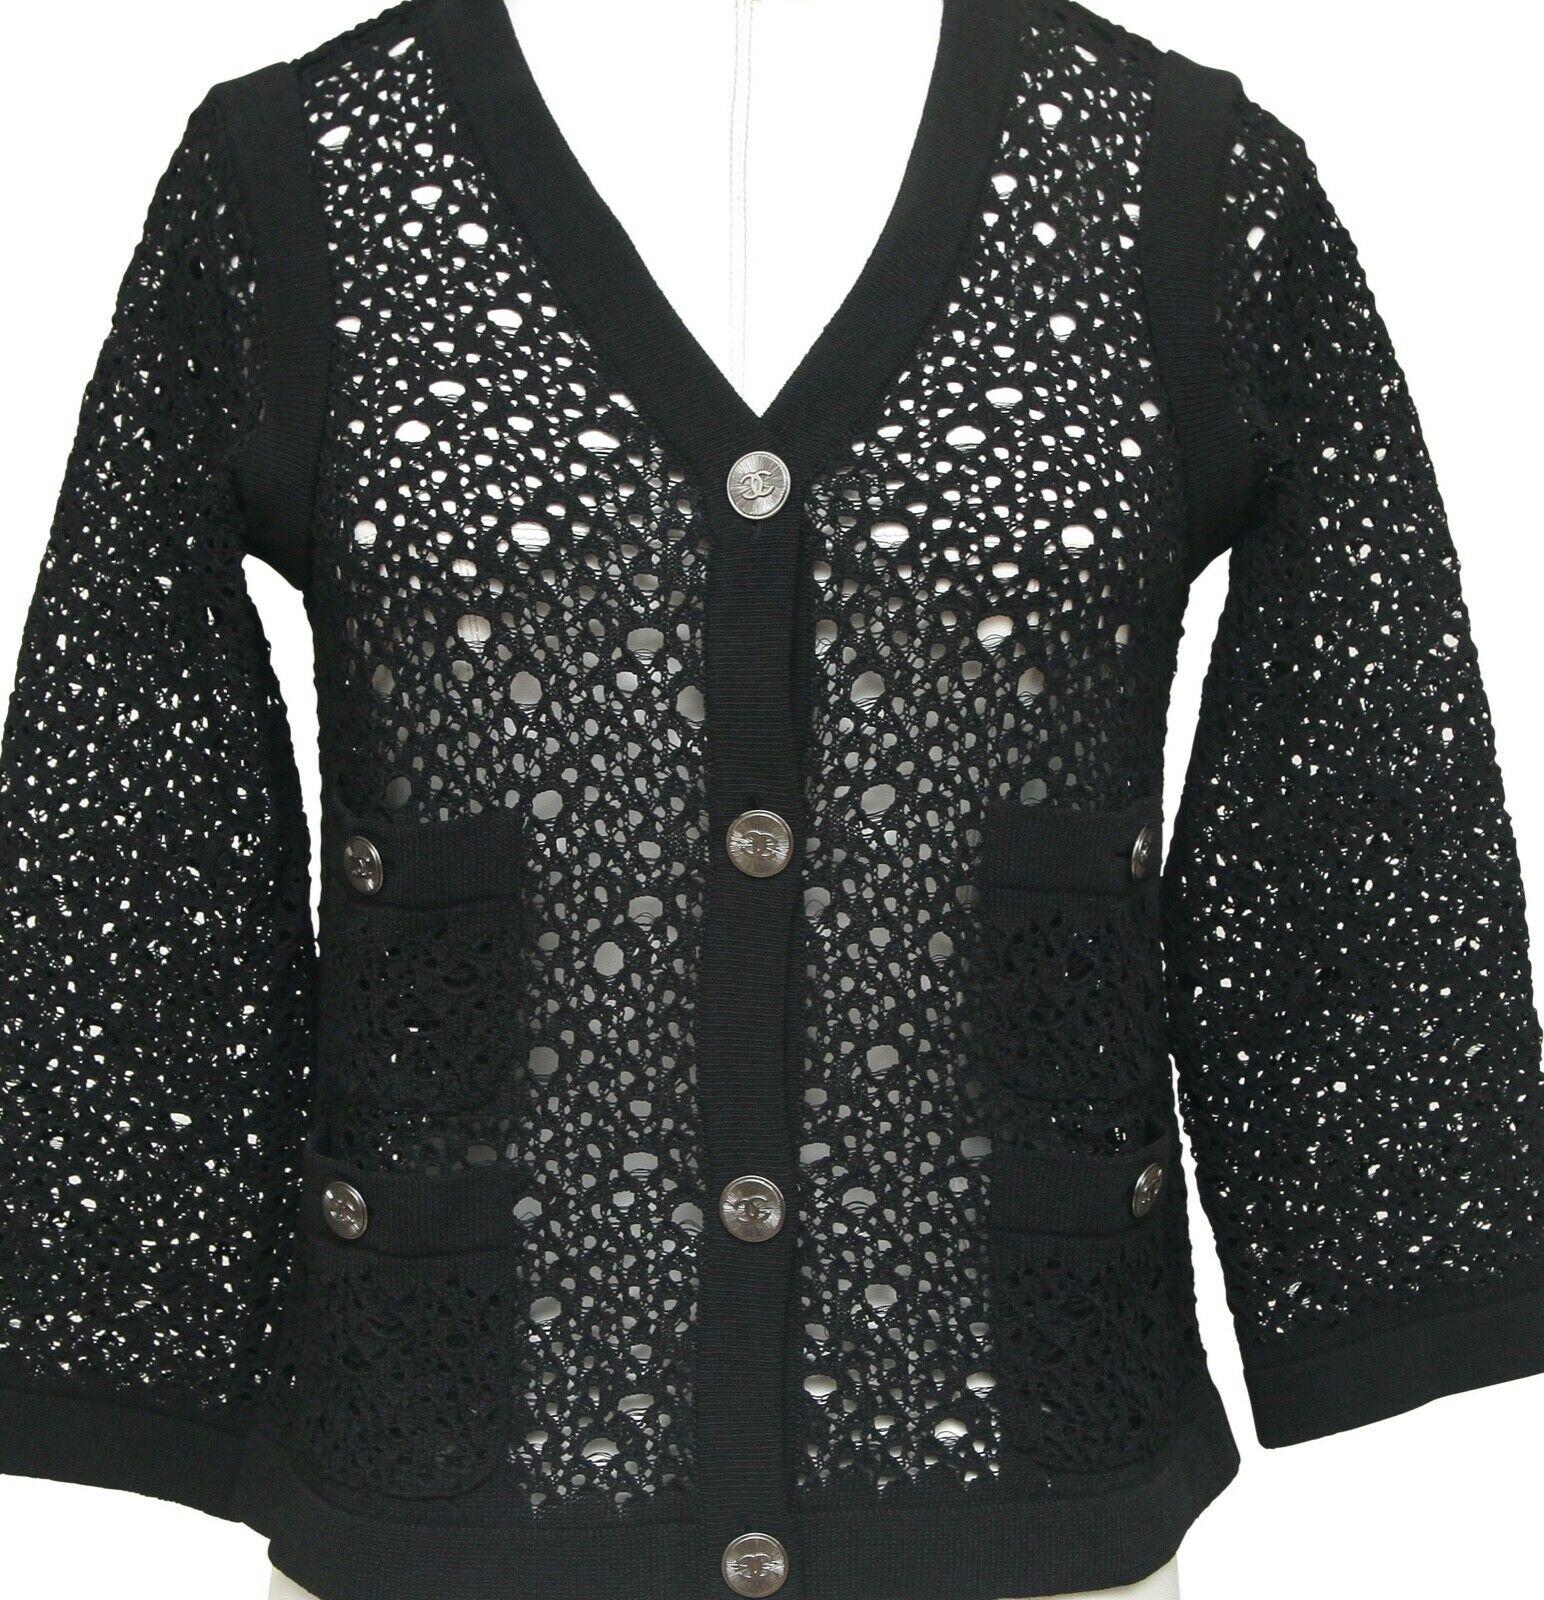 CHANEL Black Cardigan Sweater Knit V-Neck Buttons 3/4 Sleeves Sz 36 2012 1